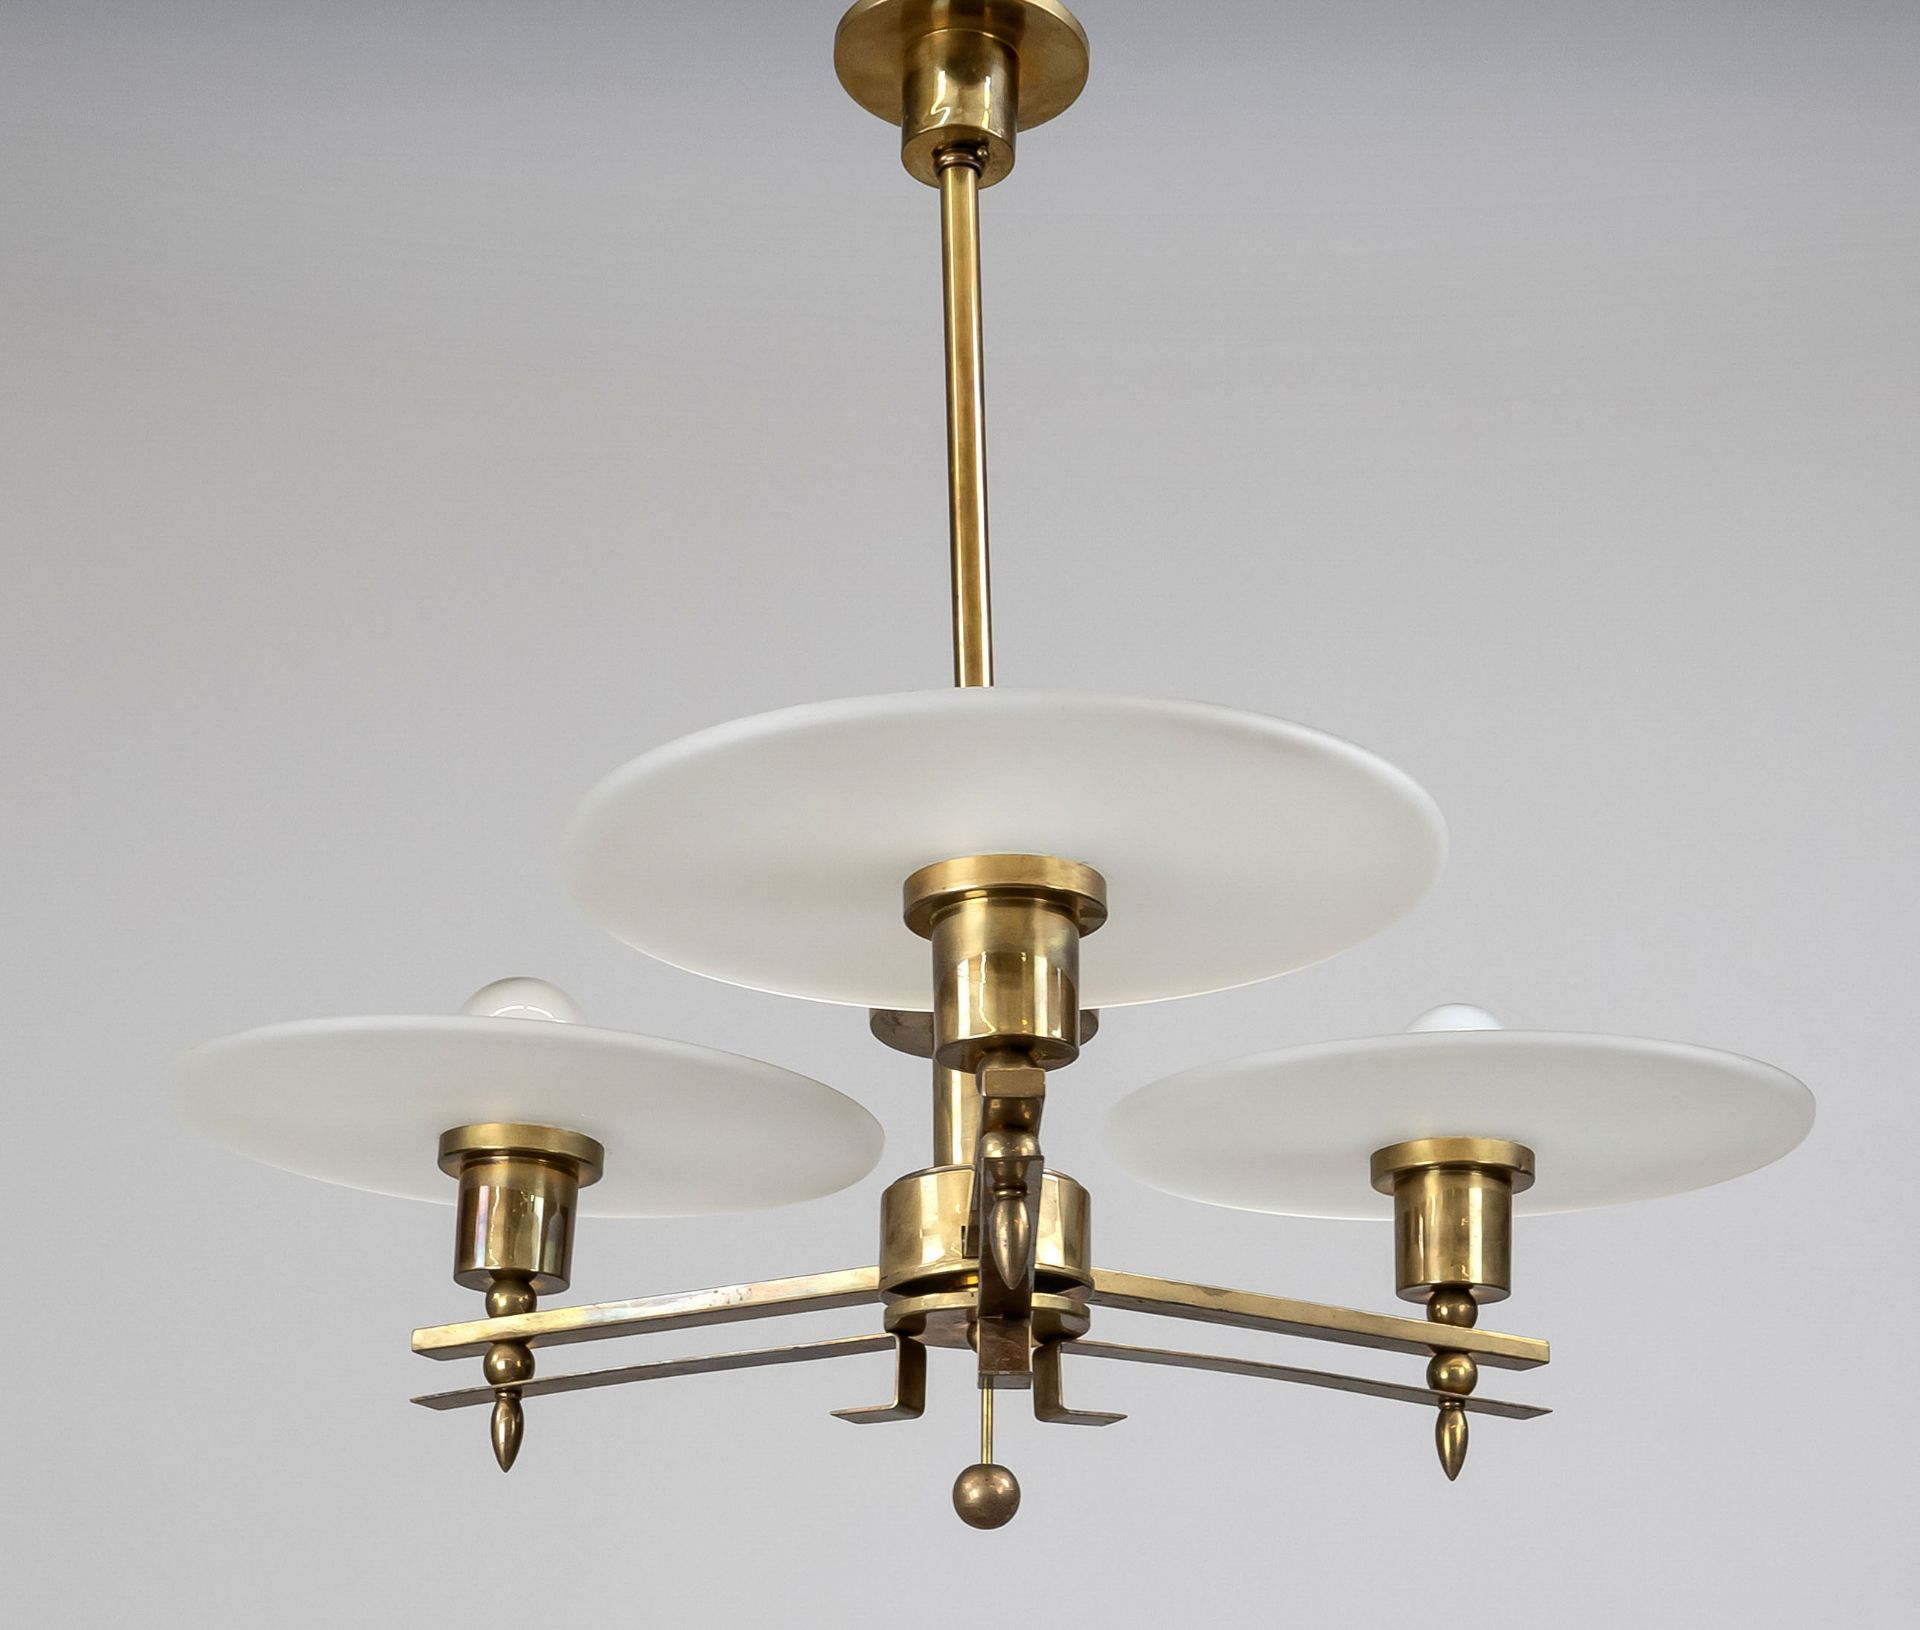 Art deco ceiling lamp, 1930s. Brass console with 3 horizontally cantilevered arms with large frosted